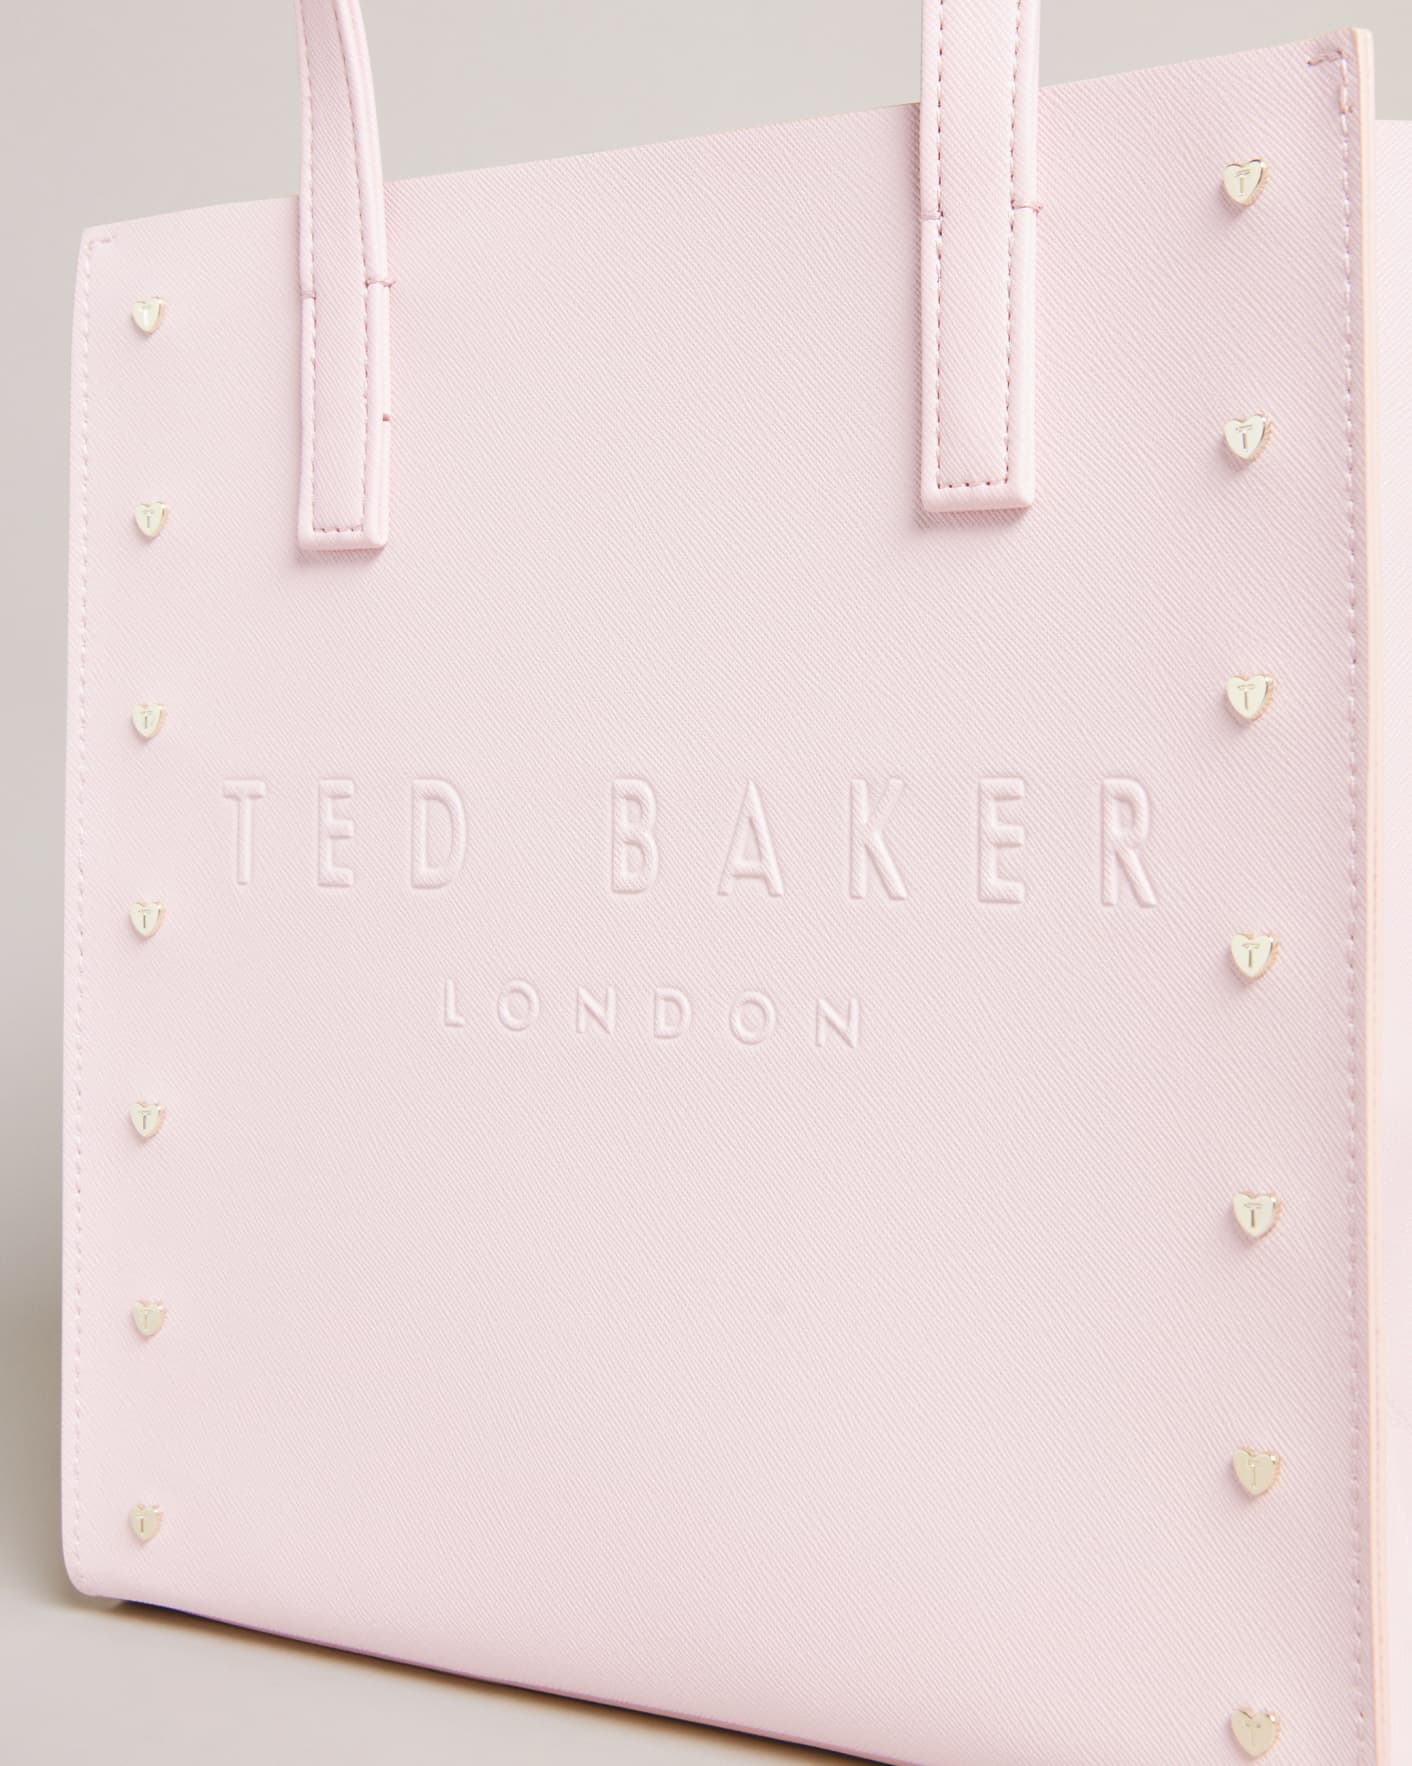 Ted Baker Stocon heart stud tote bag in pink